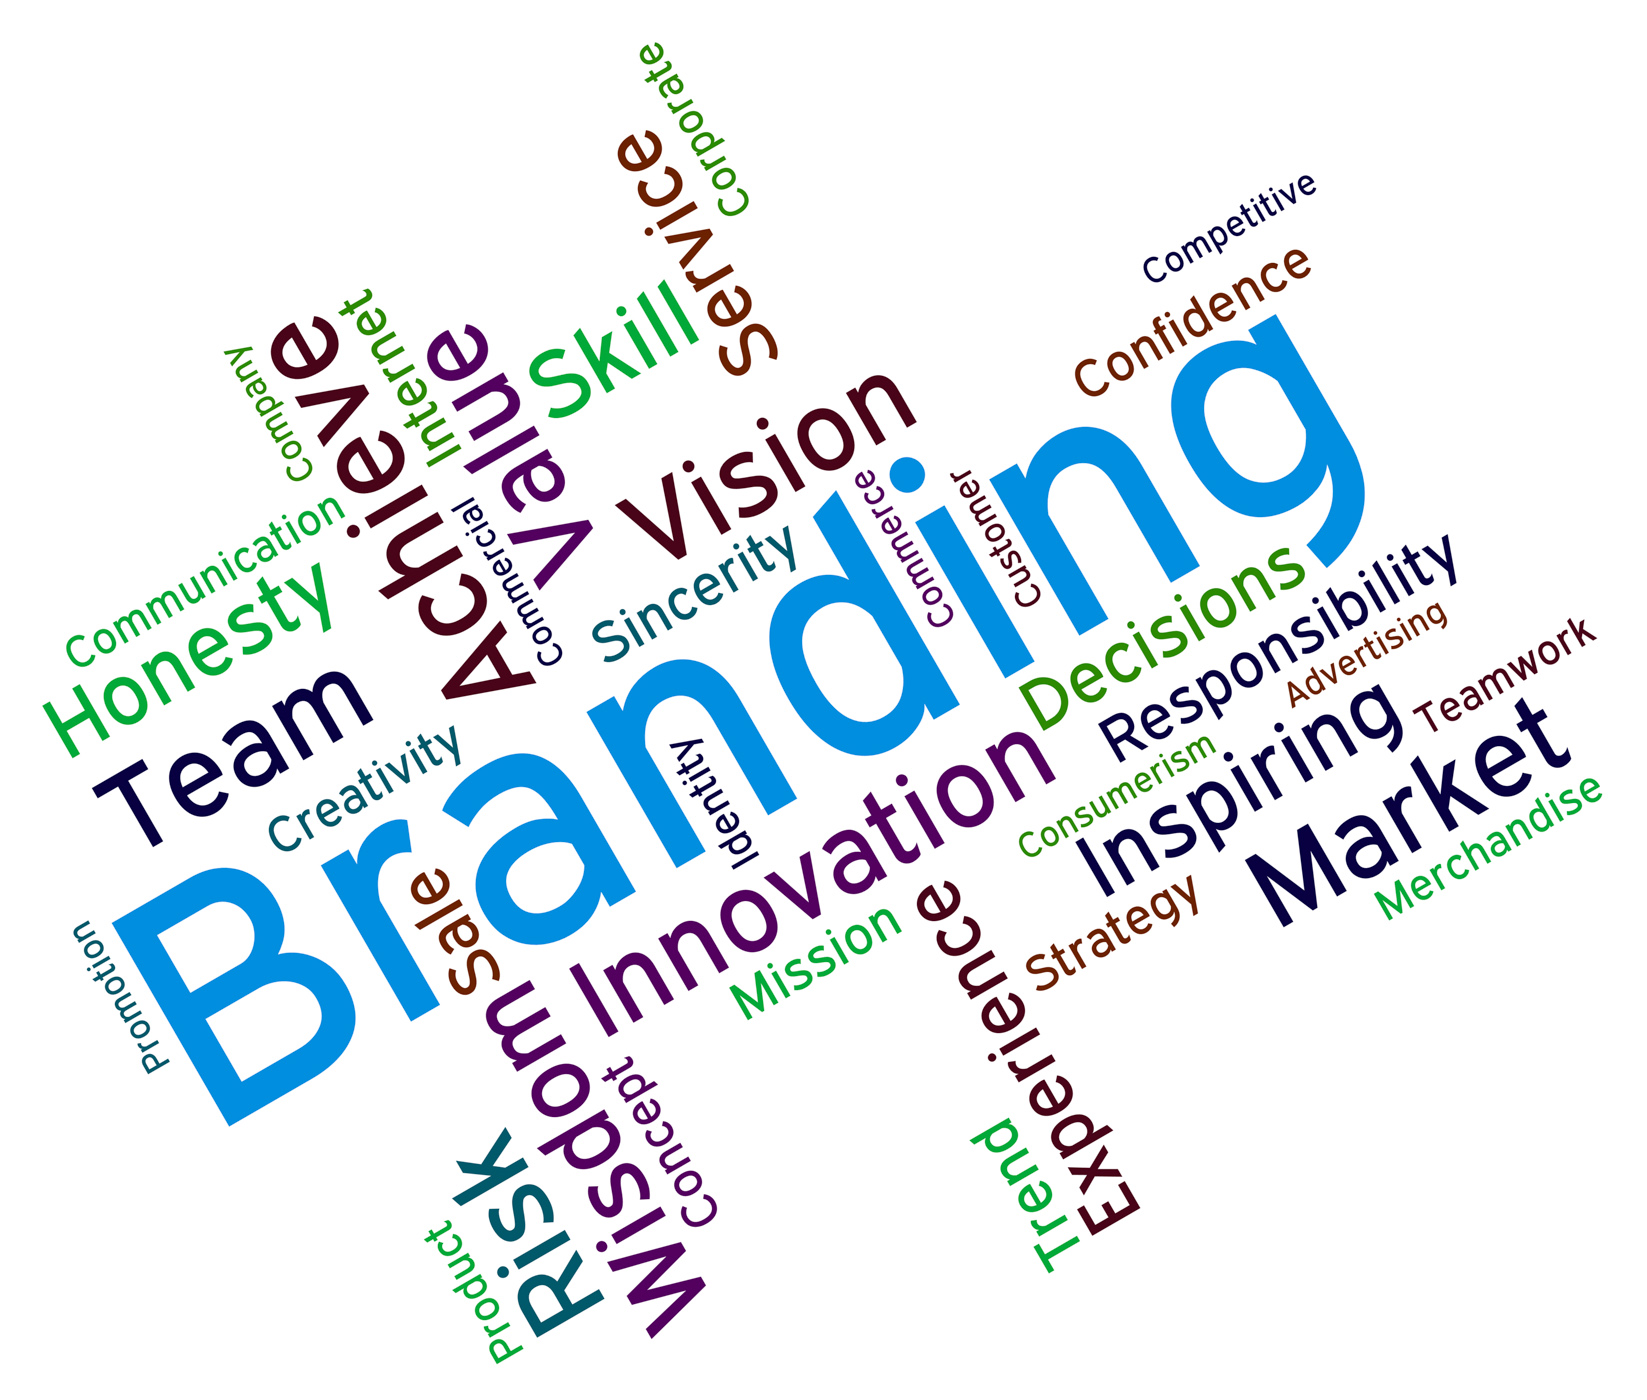 Branding words means company identity and branded photo